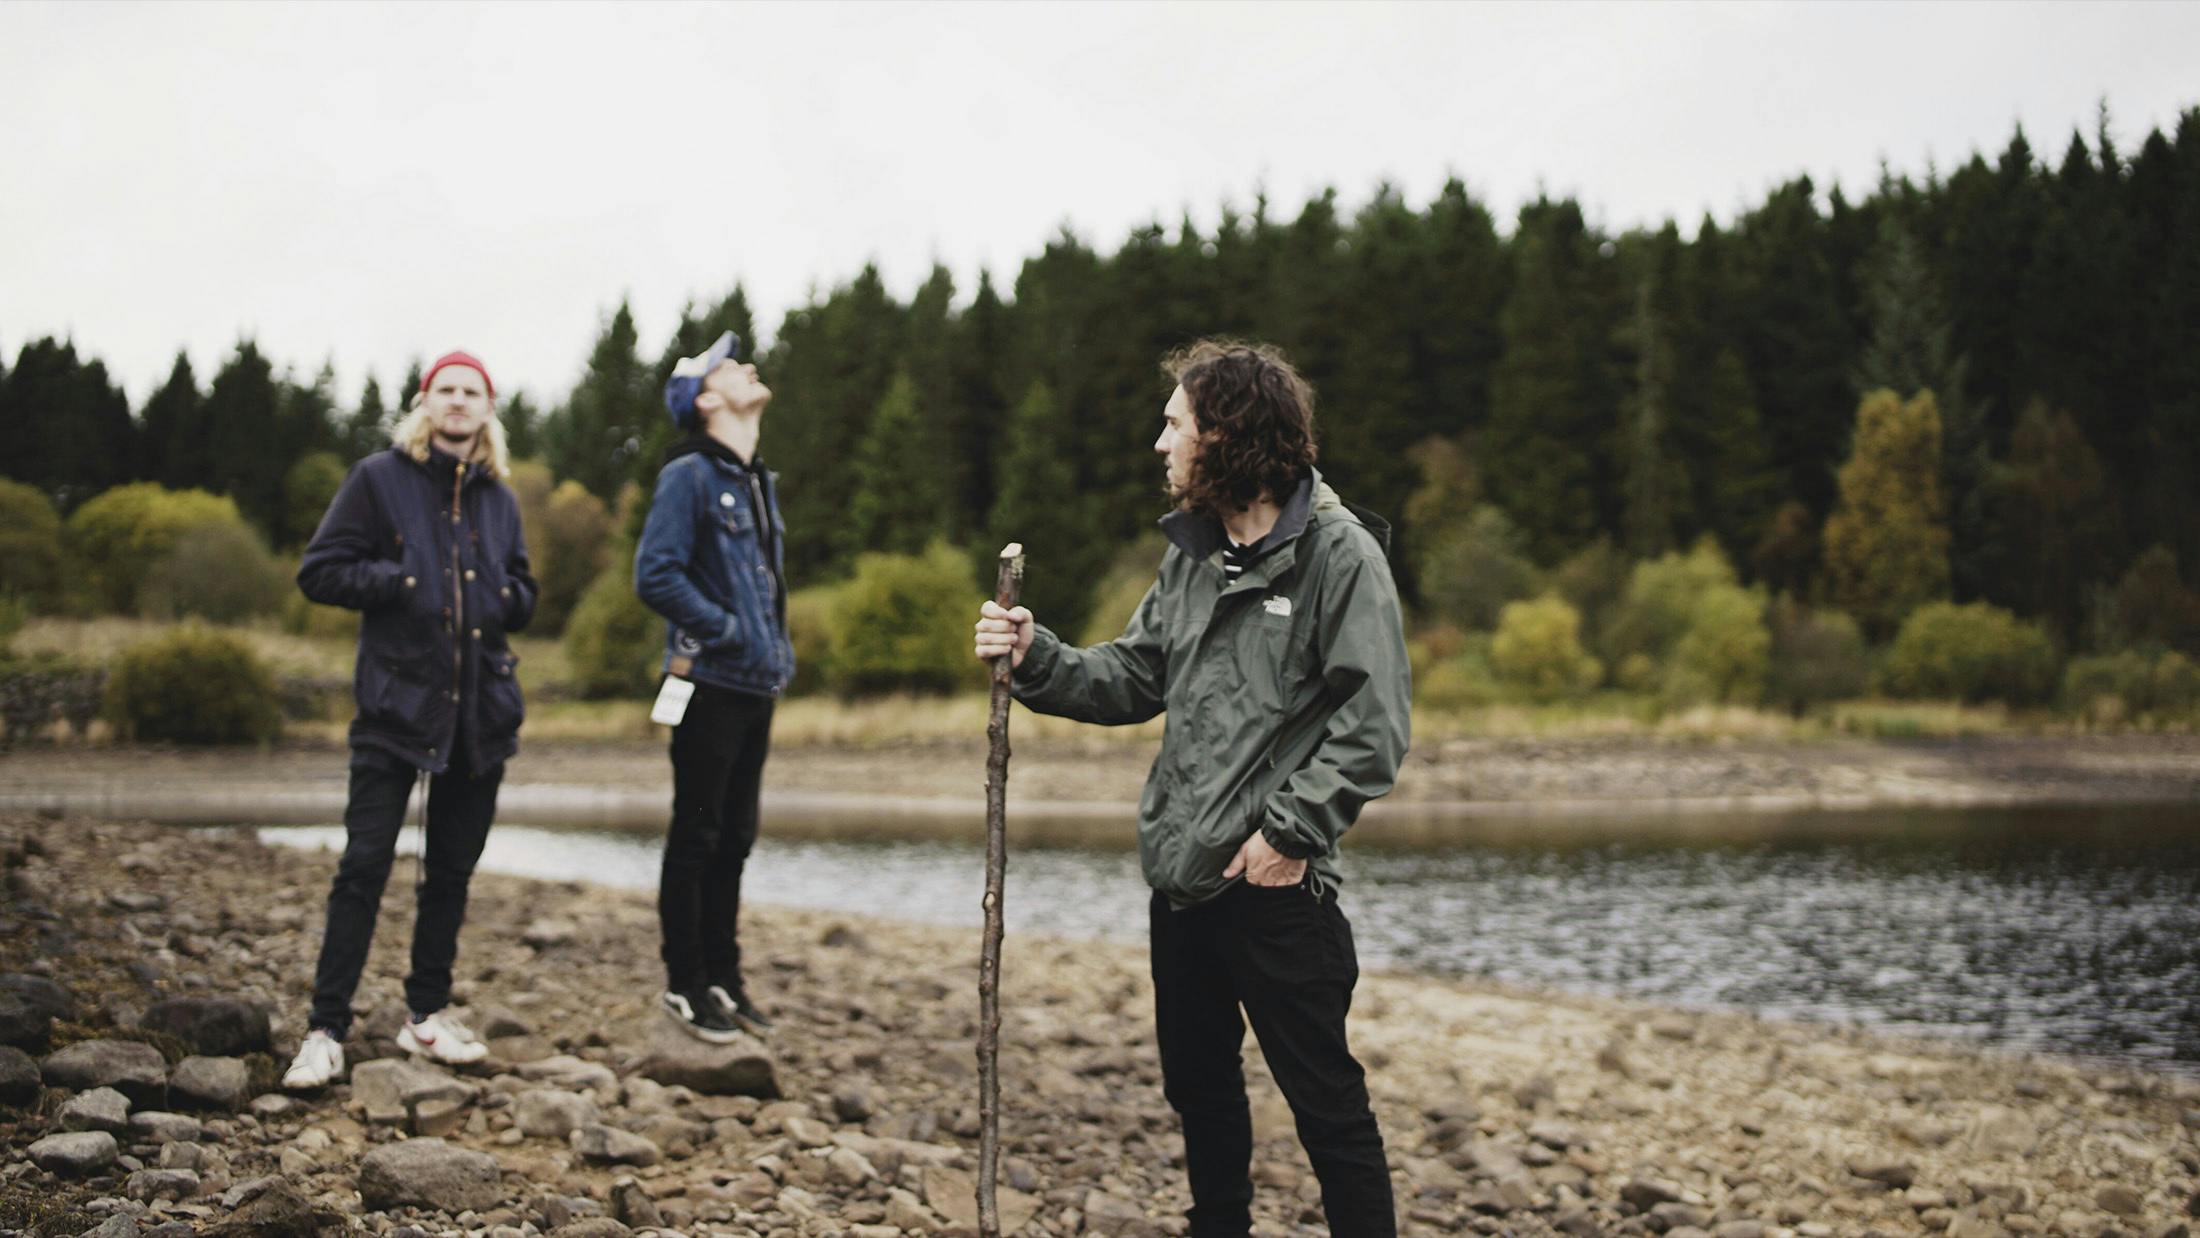 Day off at Kielder Park! Bjorn our sound engineer together with Jesper and Seb who is holding a walking stick.